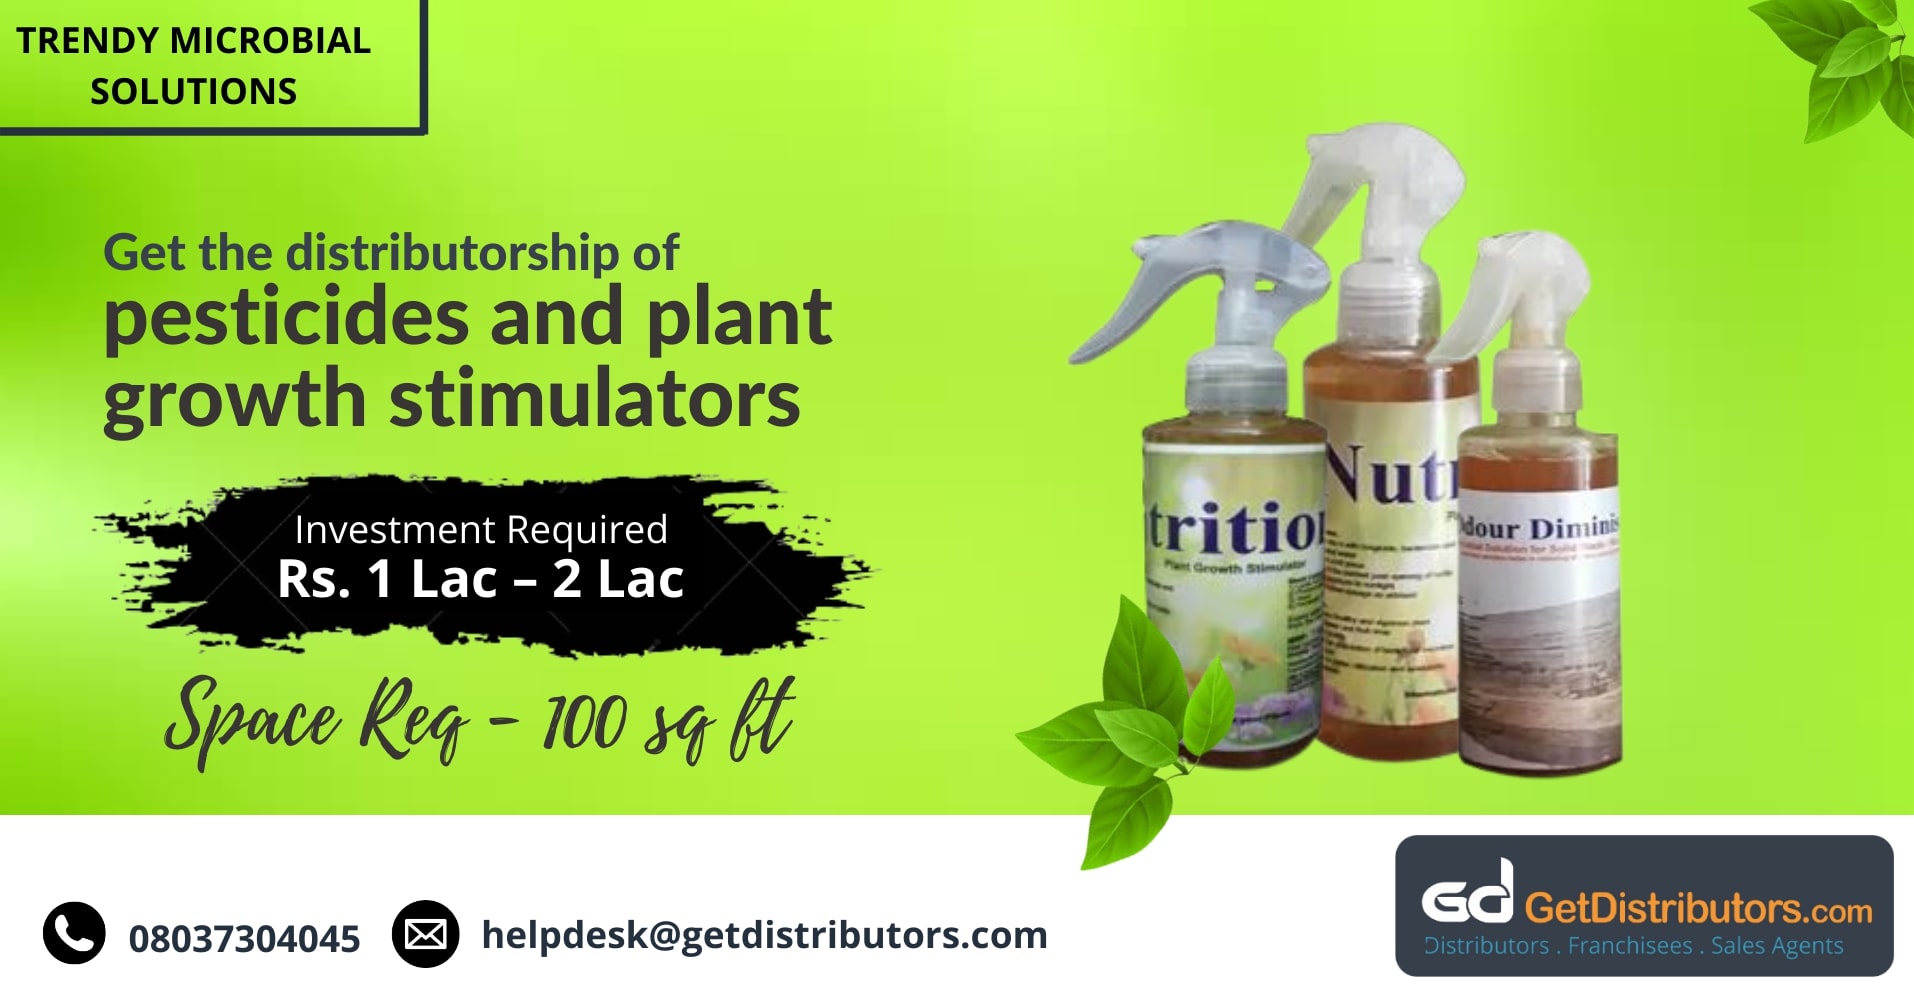 Wide range of organic pesticides and plant growth stimulators for distribution